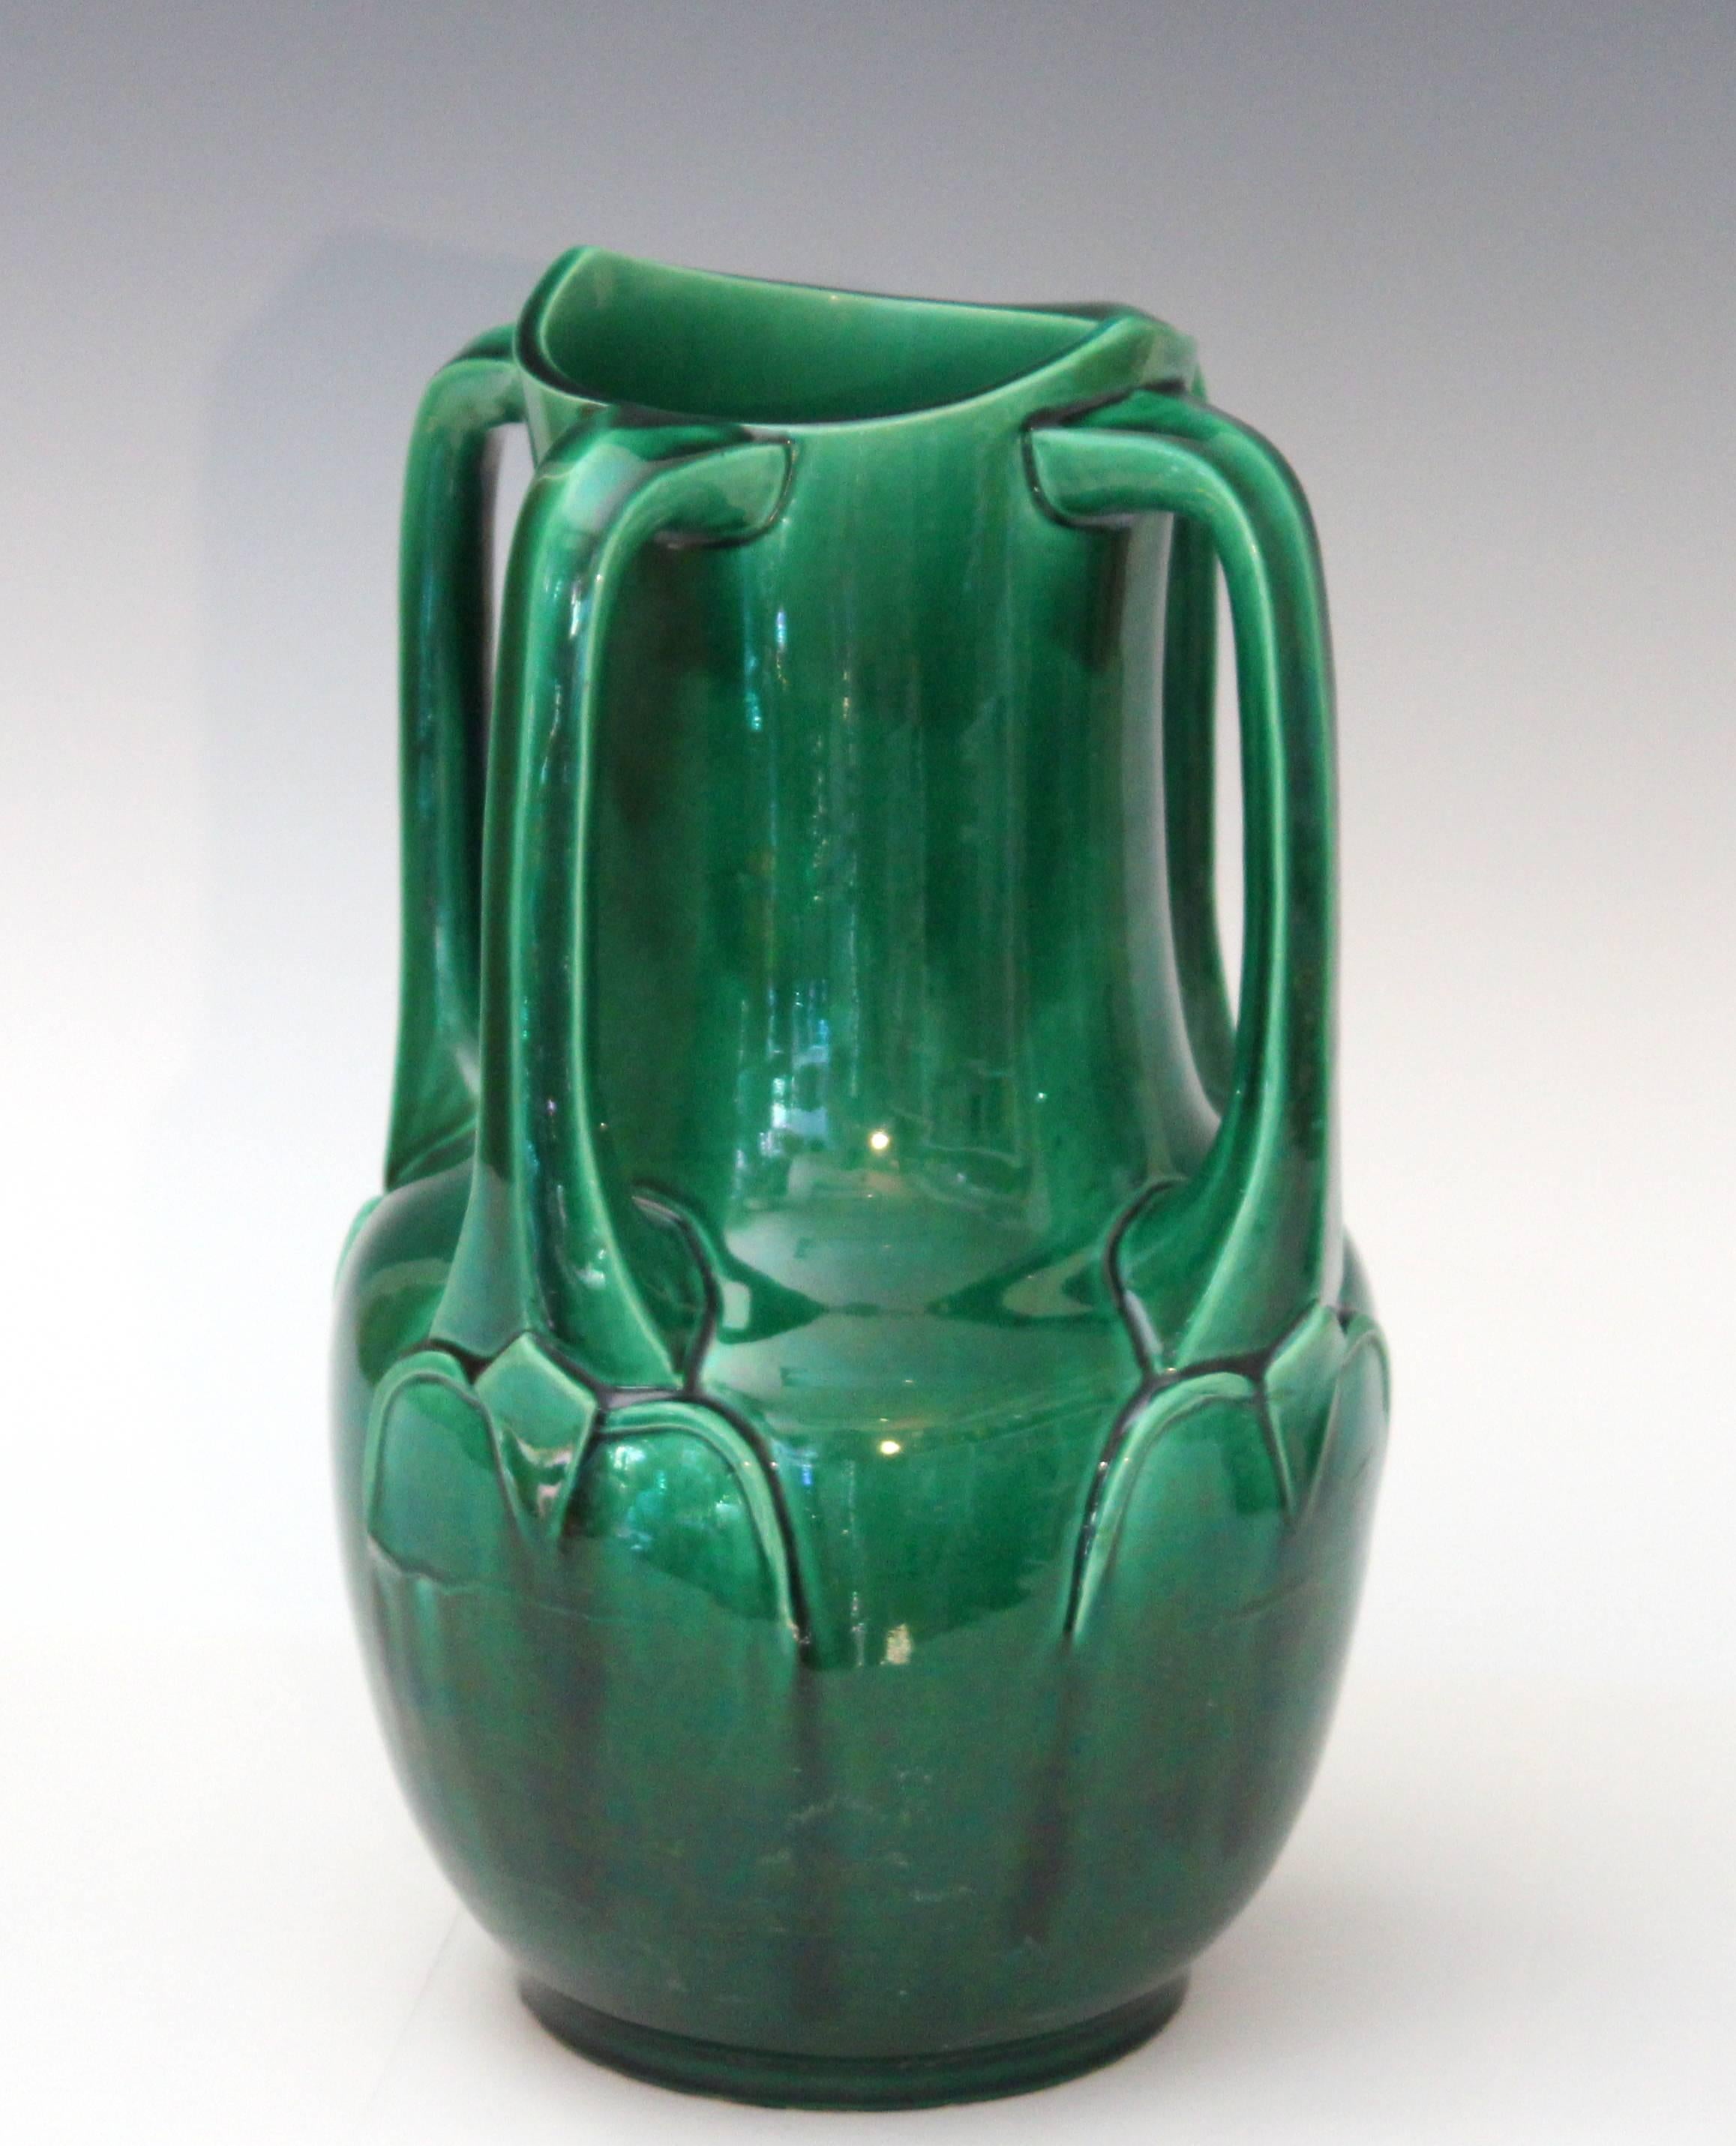 Awaji Pottery vase in architectural Art Nouveau form with four applied buttress handles and deep green monochrome glaze, circa 1910s. Measures: 12" high, 8" diameter. Good vintage condition, small chip to "ear" at rim repaired,